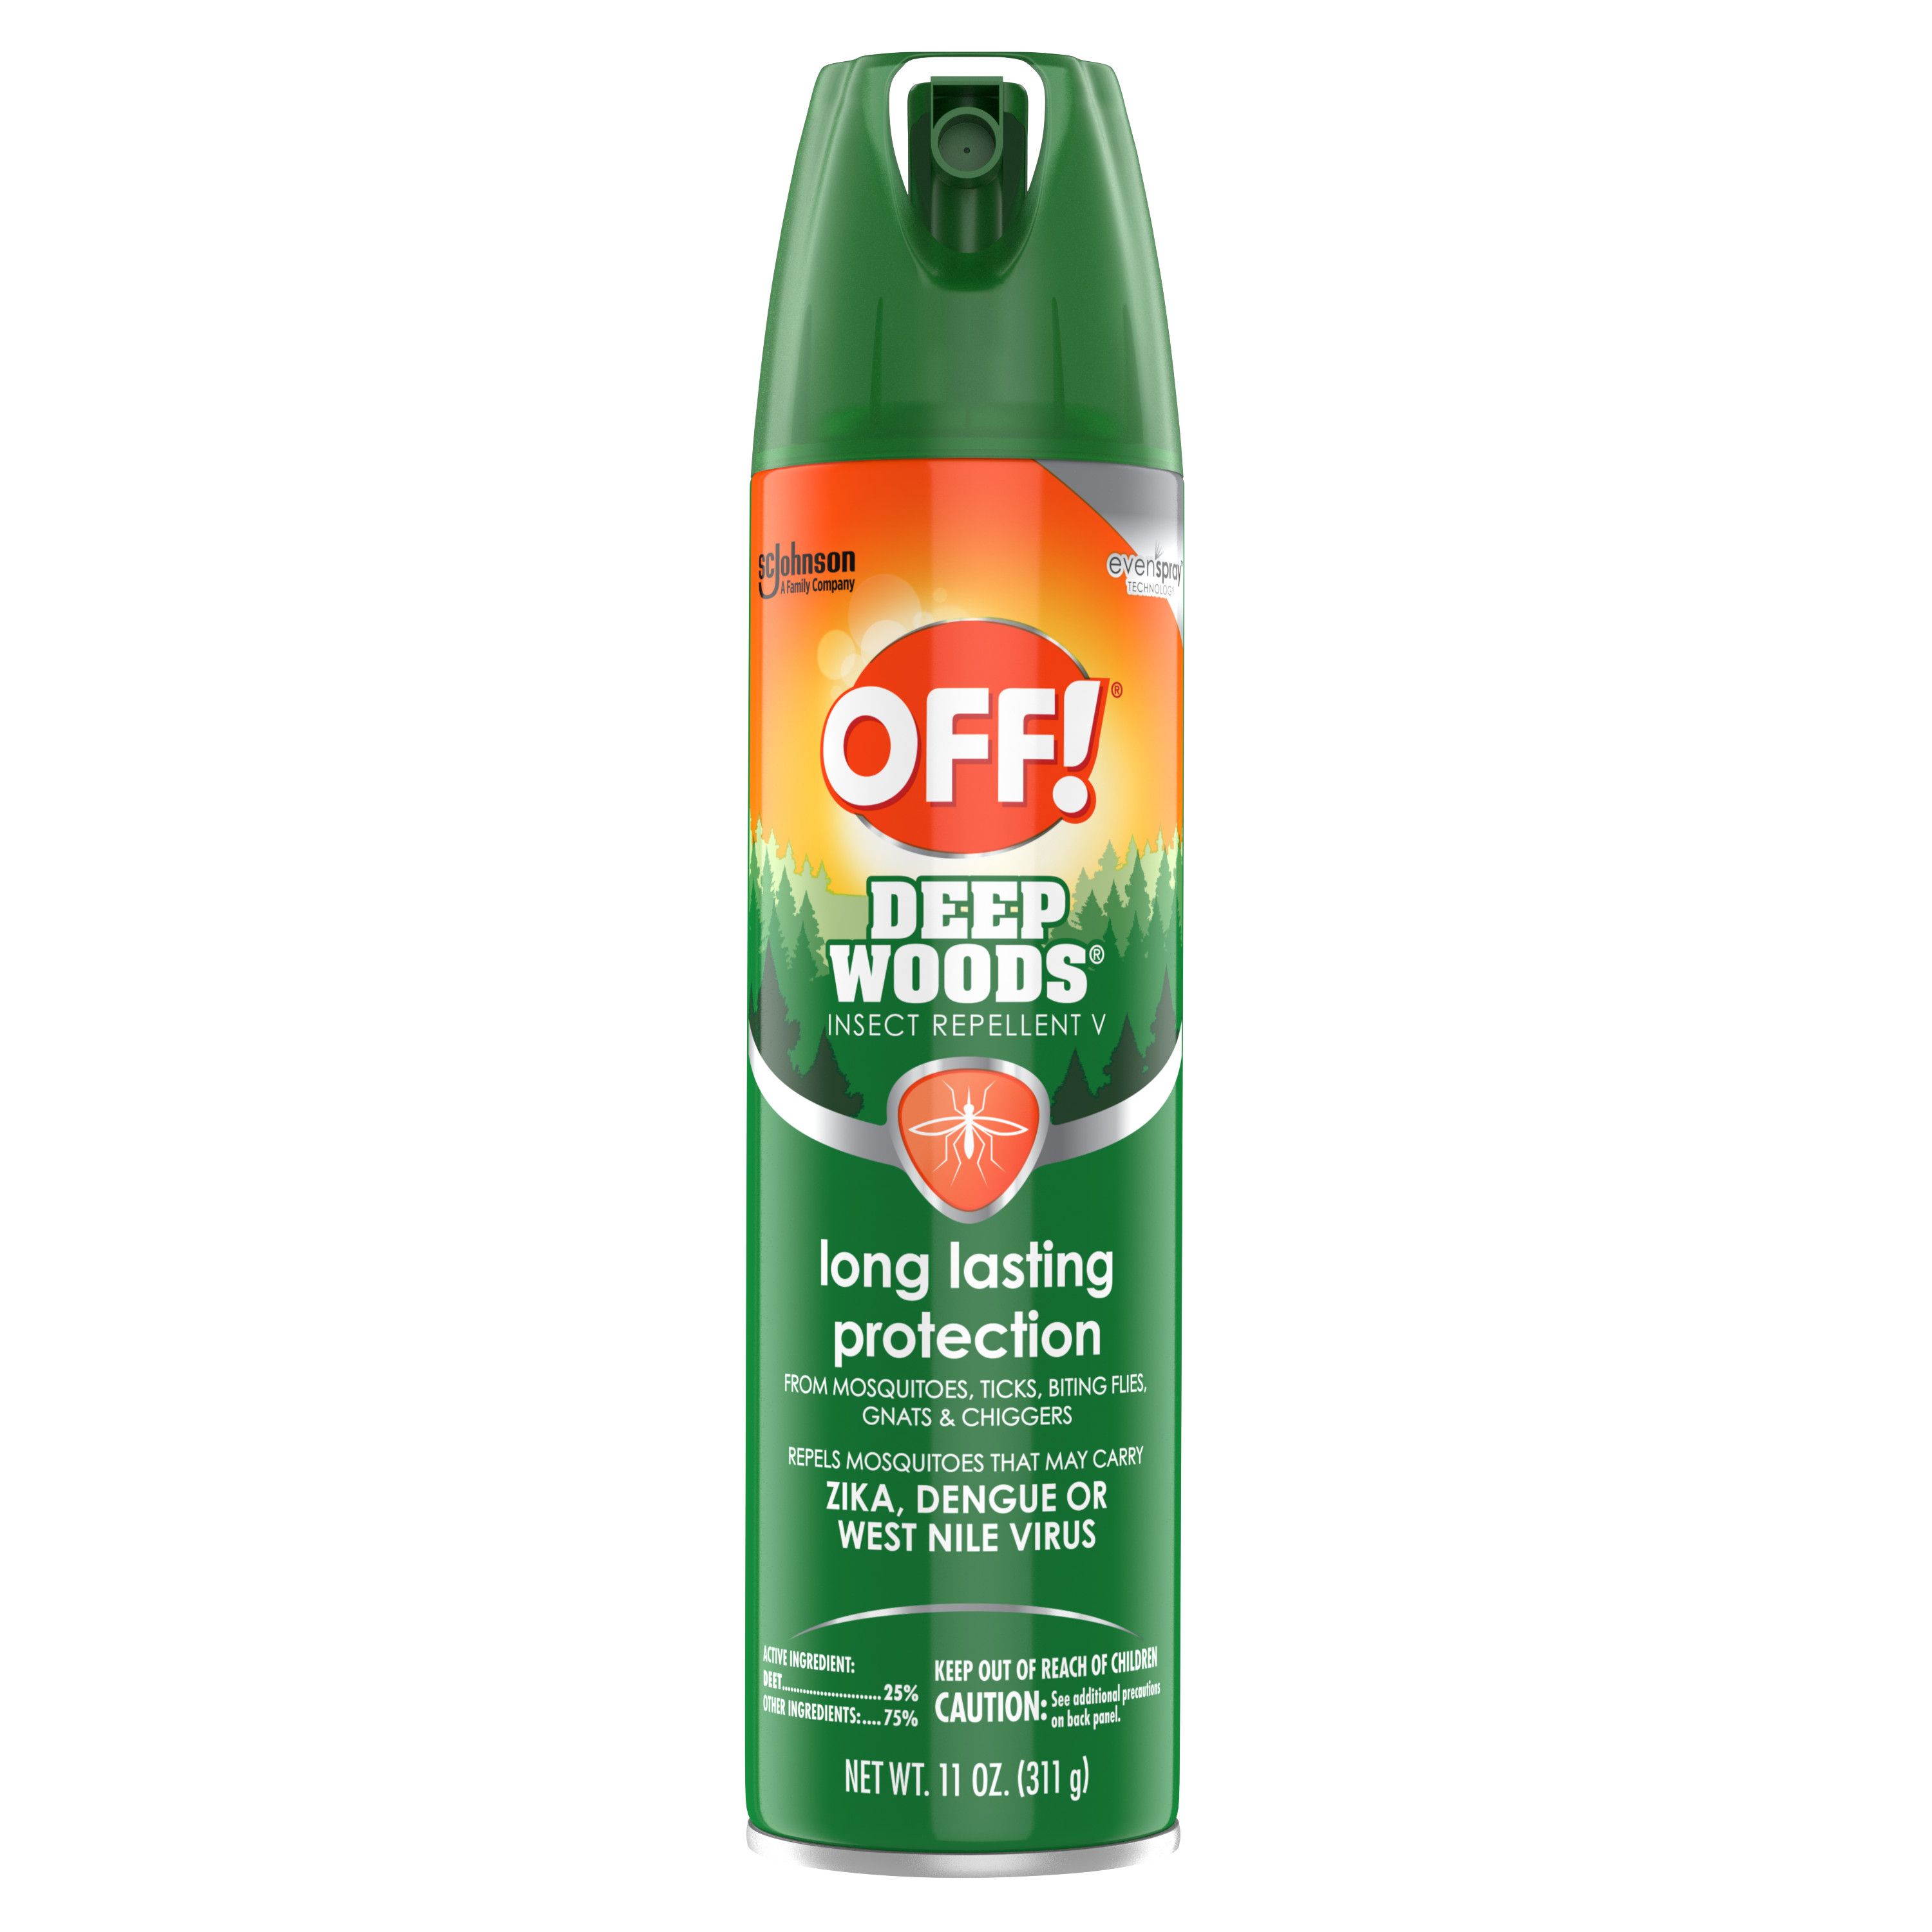 Deep Woods Insect Repellent V